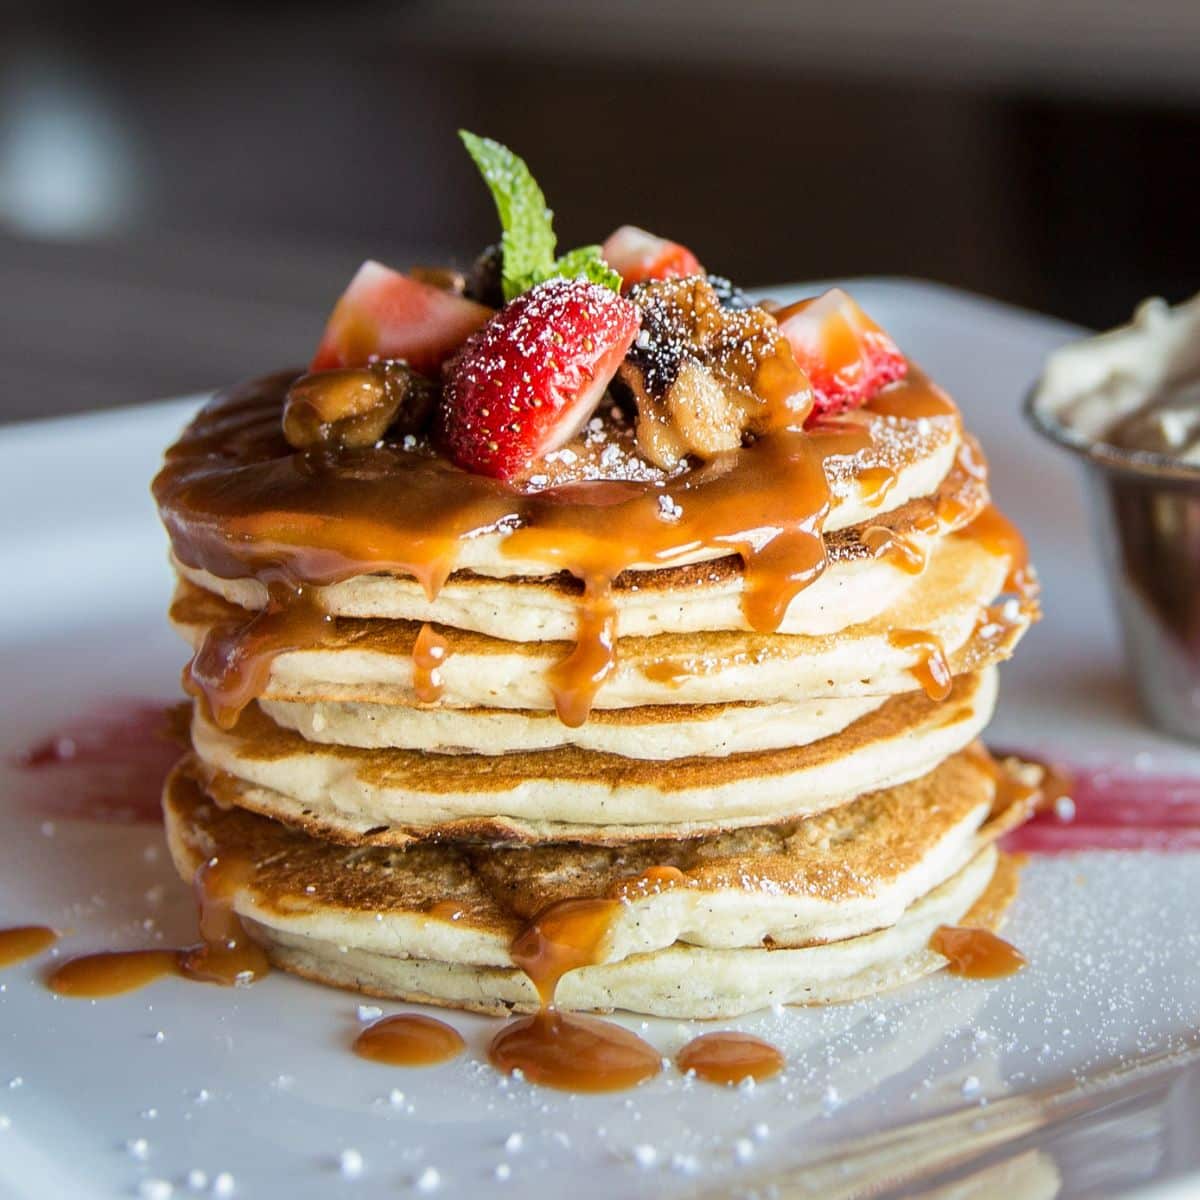 Pile of yummy pancakes with sliced fruits and drizzled frosting on the top on a plate.